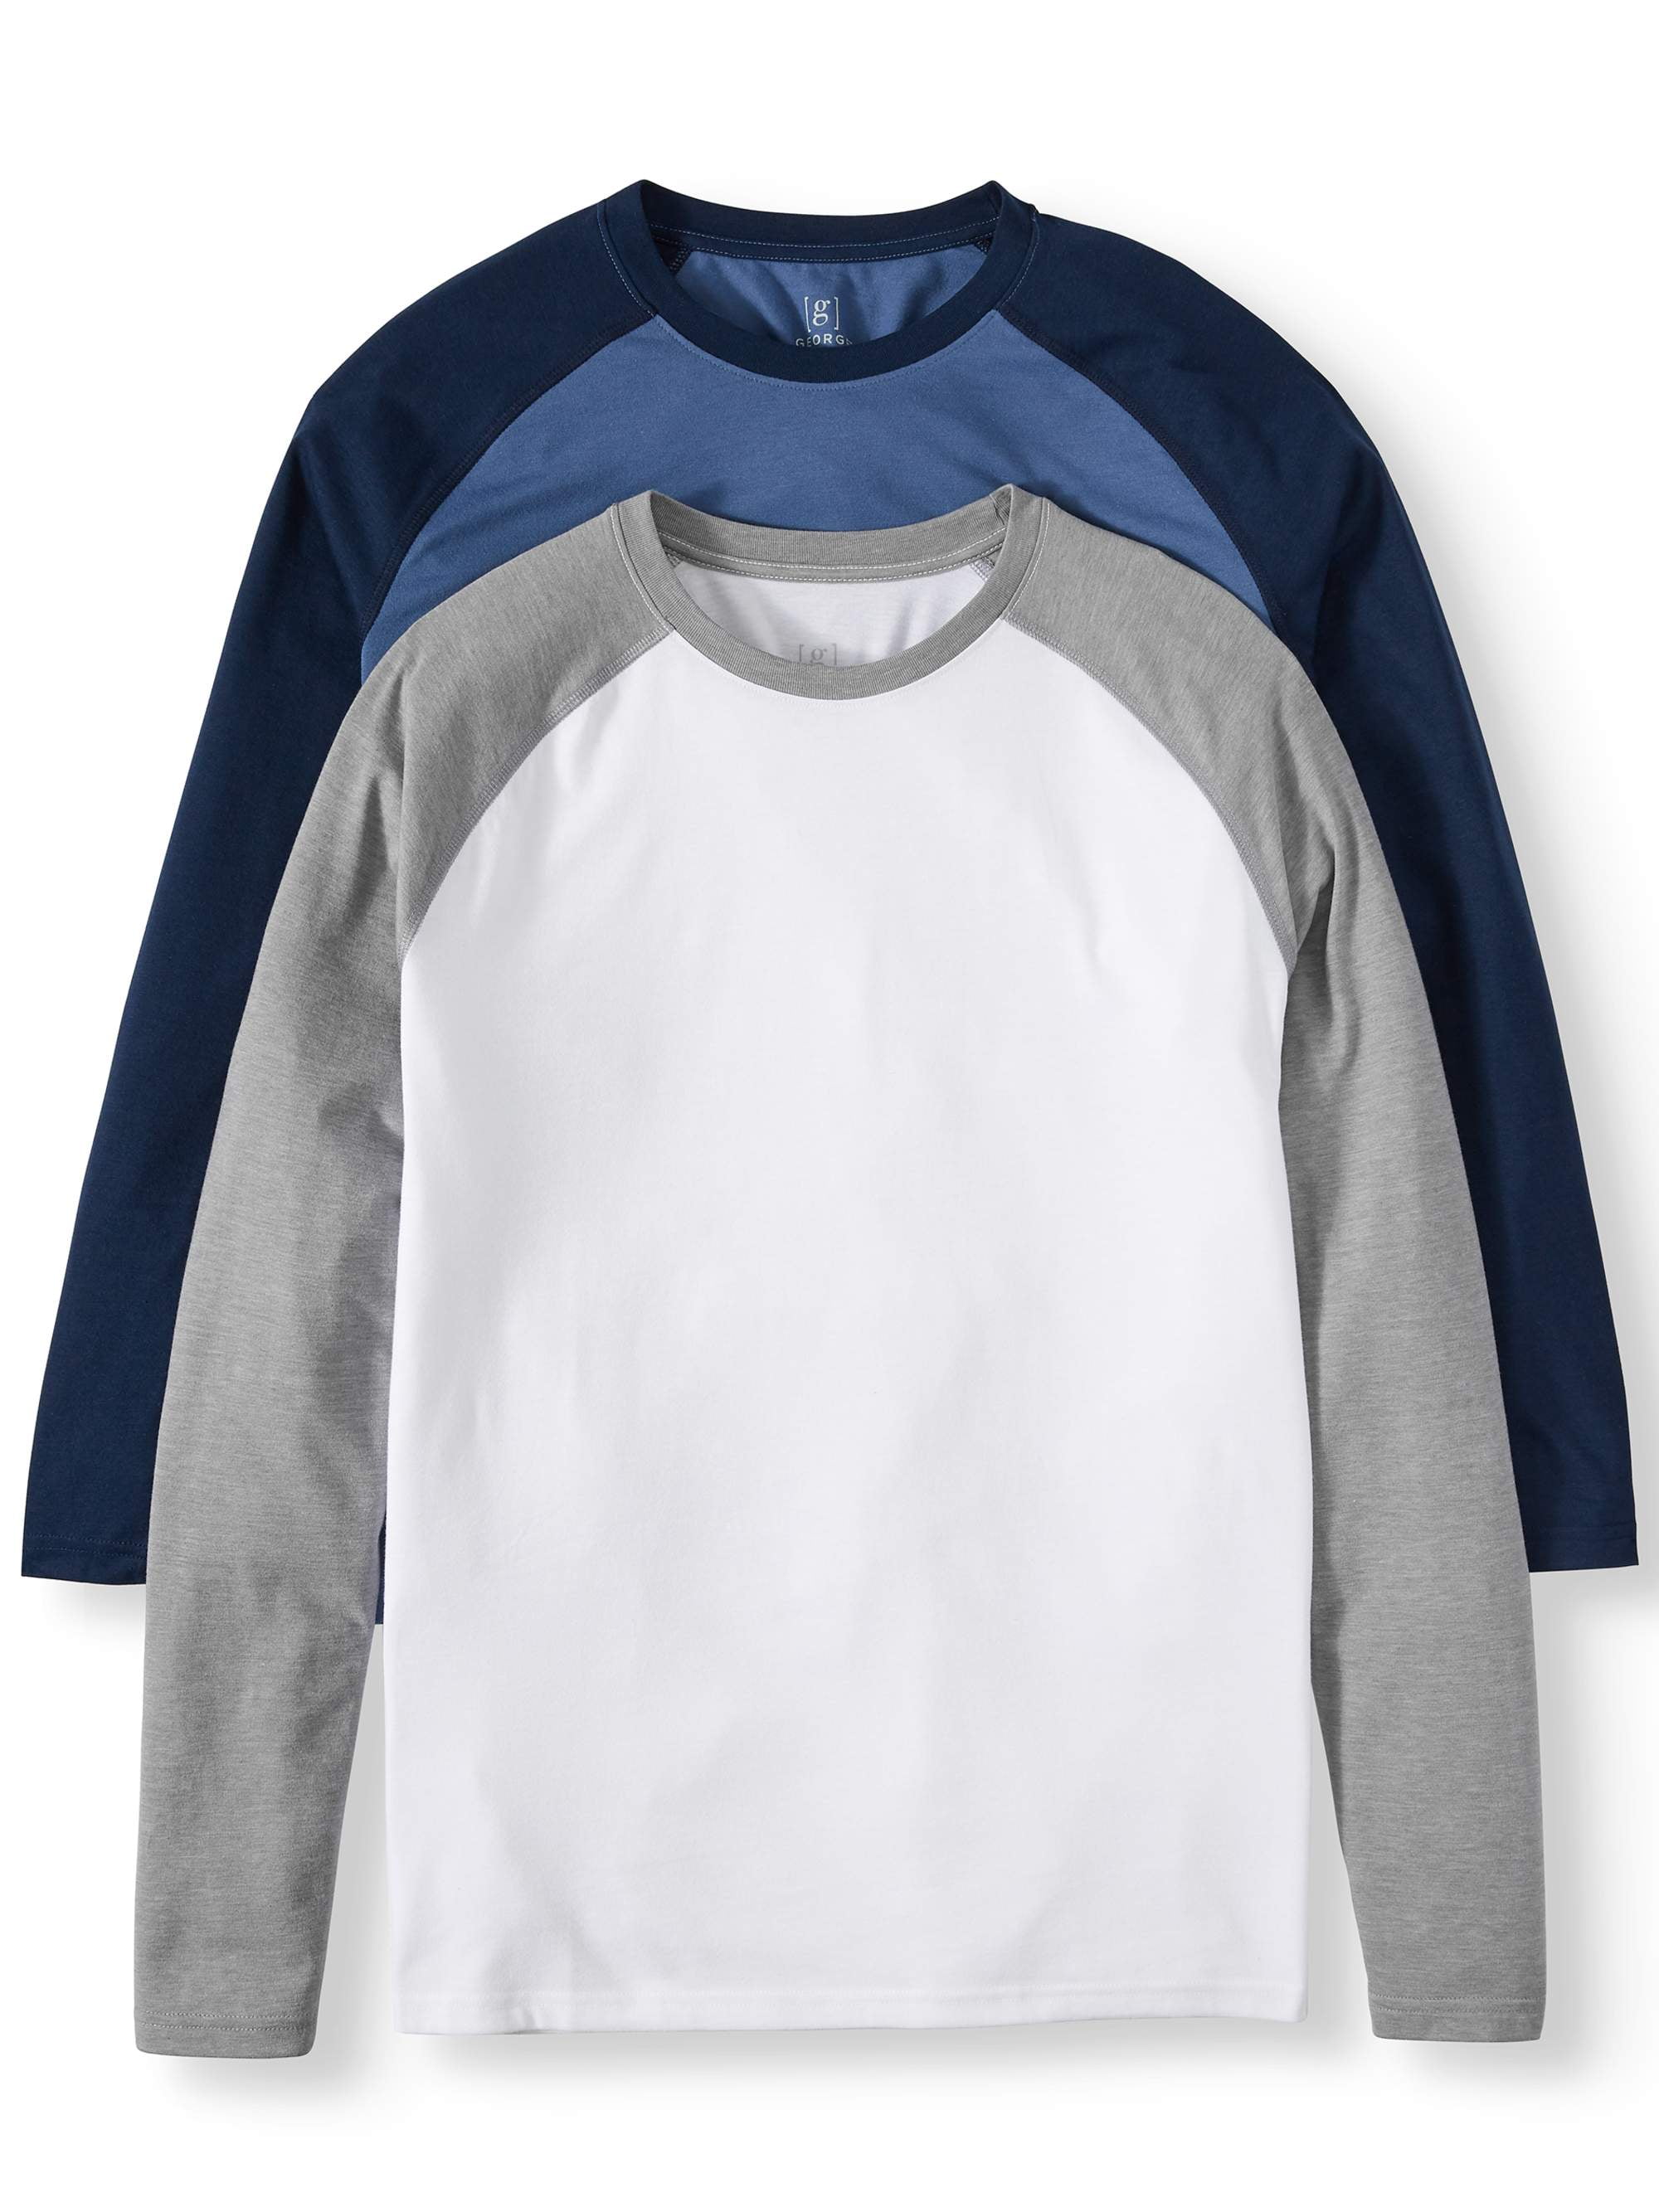 George Men's and Big Men's Long Sleeve Raglan Tee - 2-Pack, Up To Size 3XL